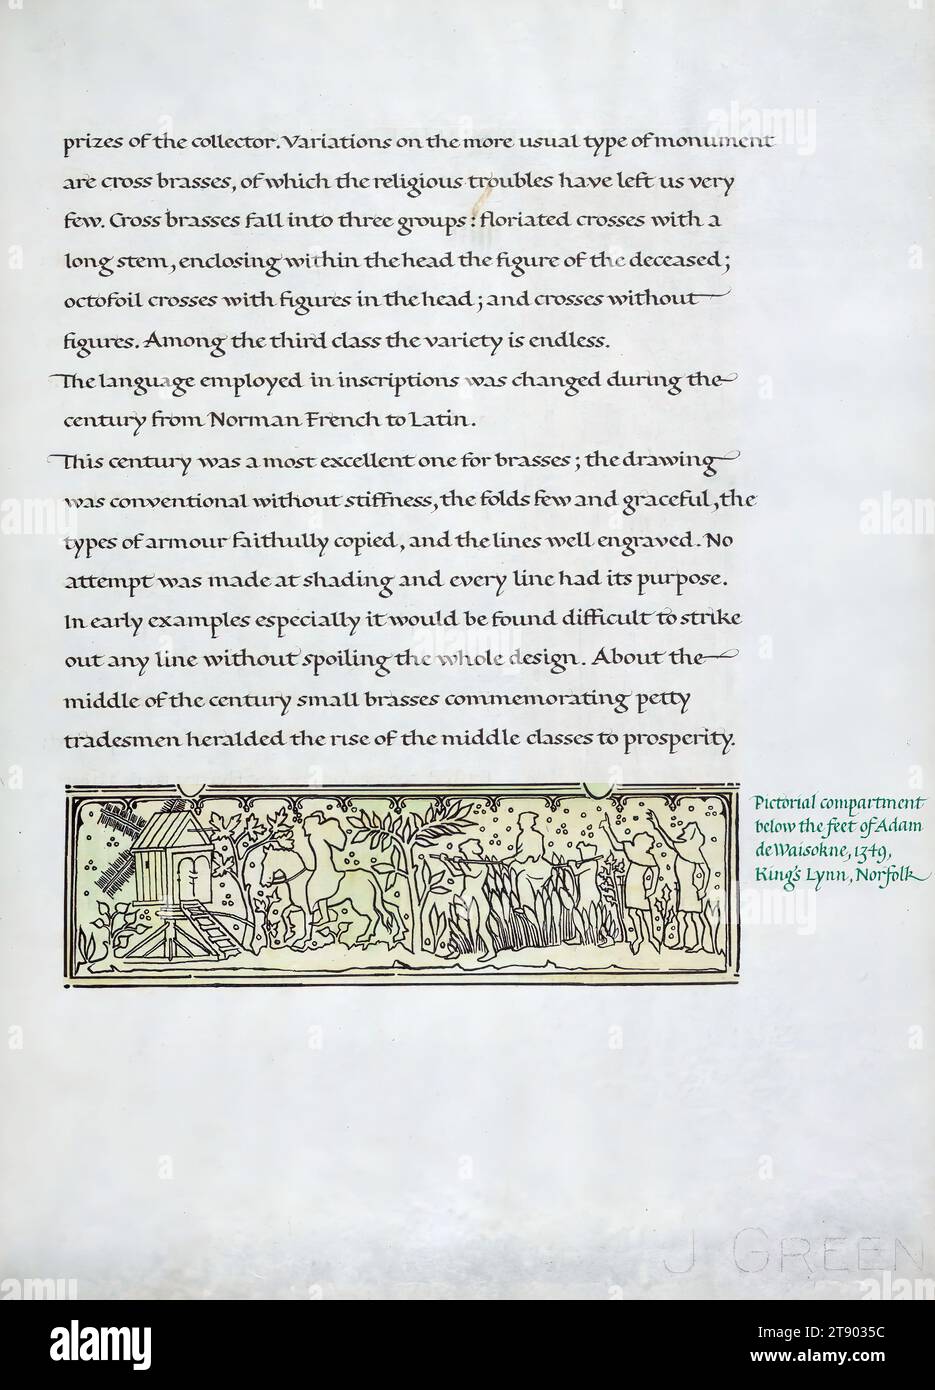 English Brasses, Illustration of the pictorial compartment below the feet of Adam de Waisokne, 1349, King's Lynn, Norfolk, John Woodcock, a twentieth-century calligrapher, hand wrote, illustrated, and bound this book on English Brasses. The manuscript contains drawings of brass rubbings of many knights and nobles, including Sir John d'Abernon, Thomas de Hope, and Nichol de Gore, as well as noble women such as the wives of Reginald de Malyns, Nicholas Wadham, and Nicholas Wotton Stock Photo